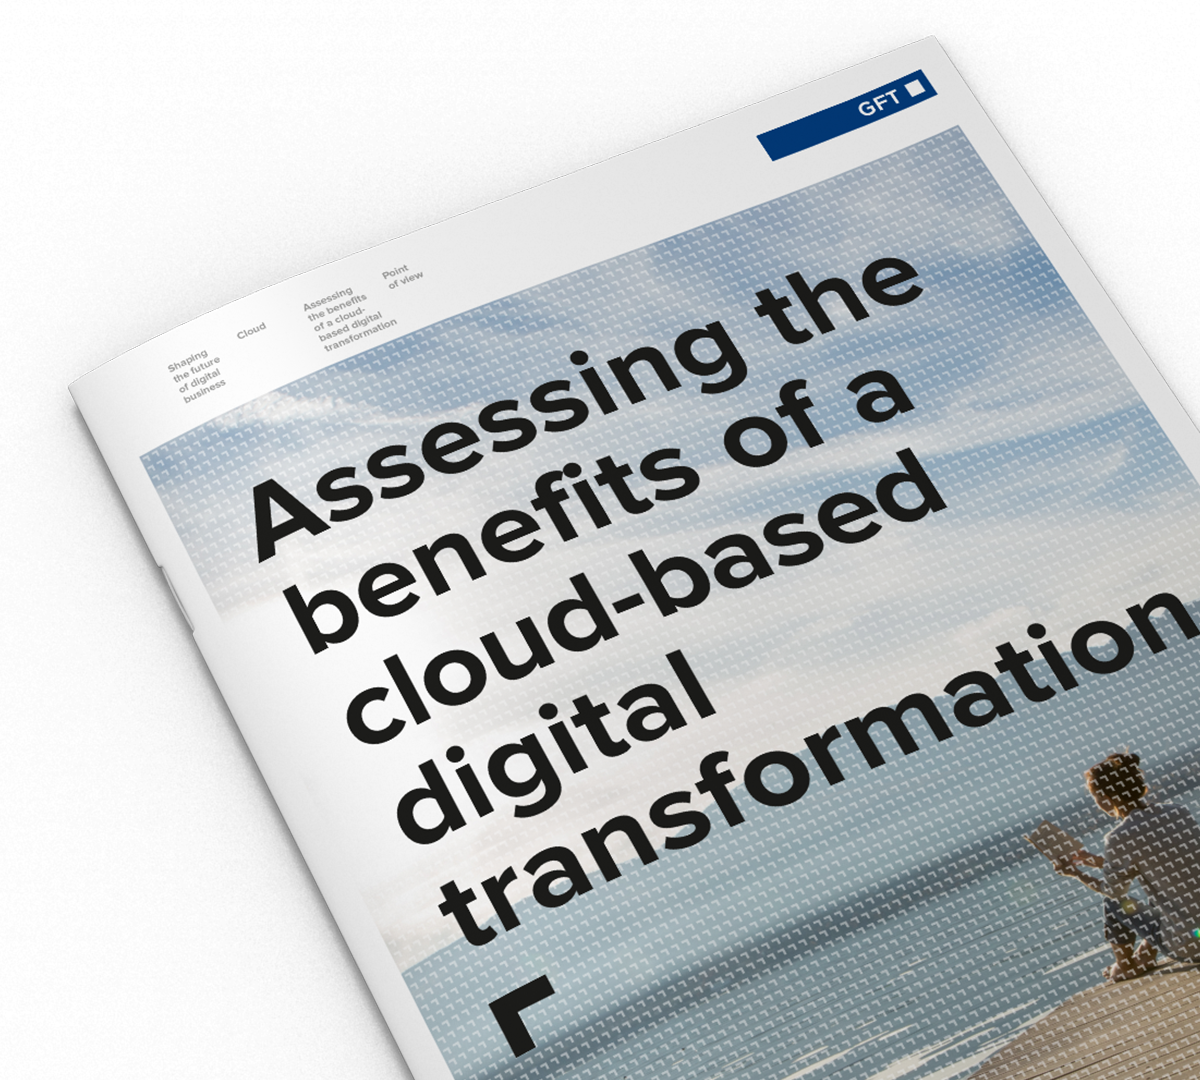 Thought leadership: Assessing the benefits of a cloud-based digital transformation